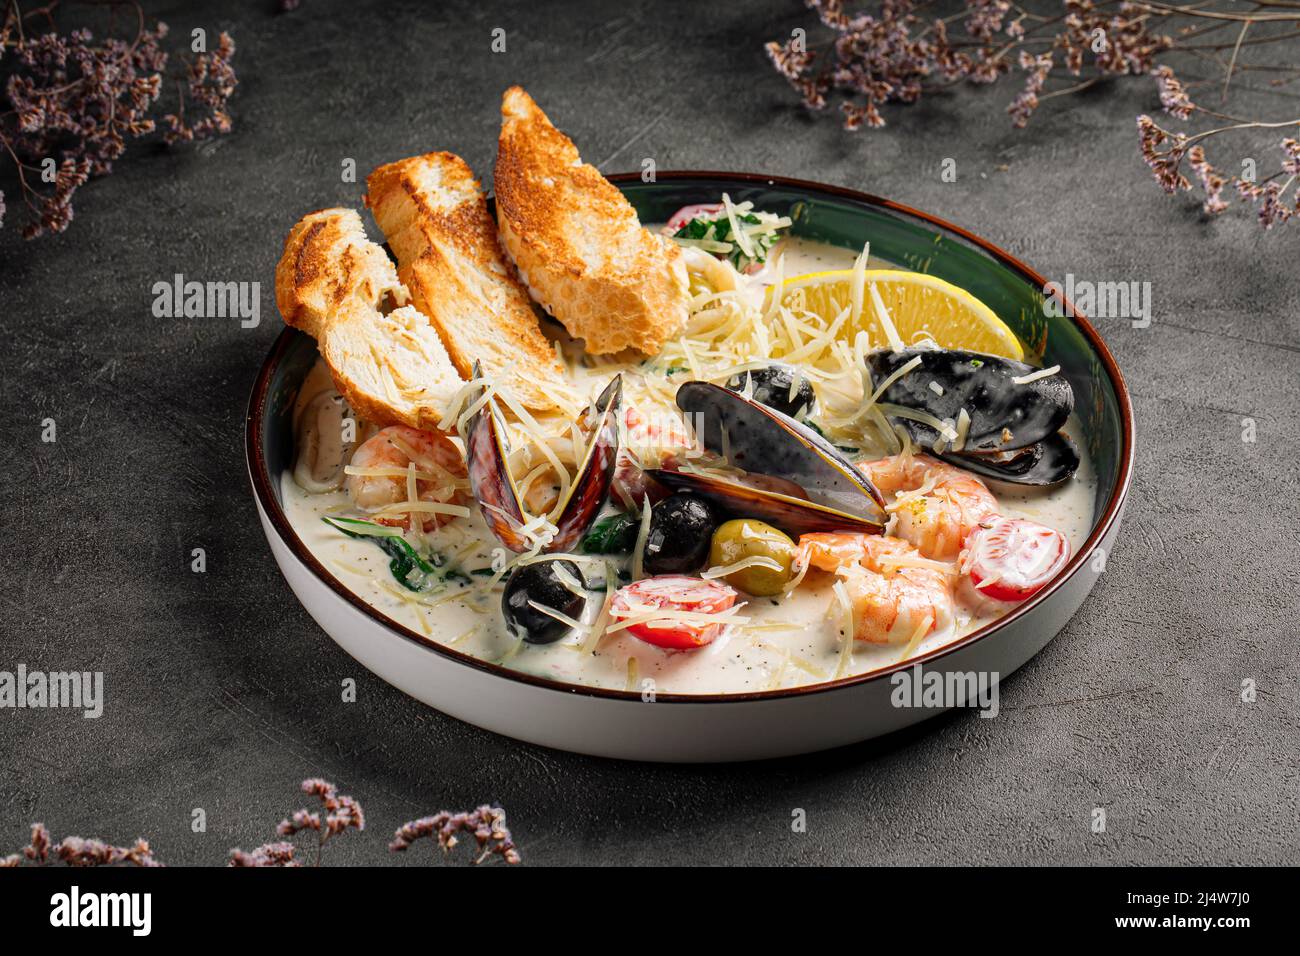 Portion of seafood saute with wheat bread Stock Photo